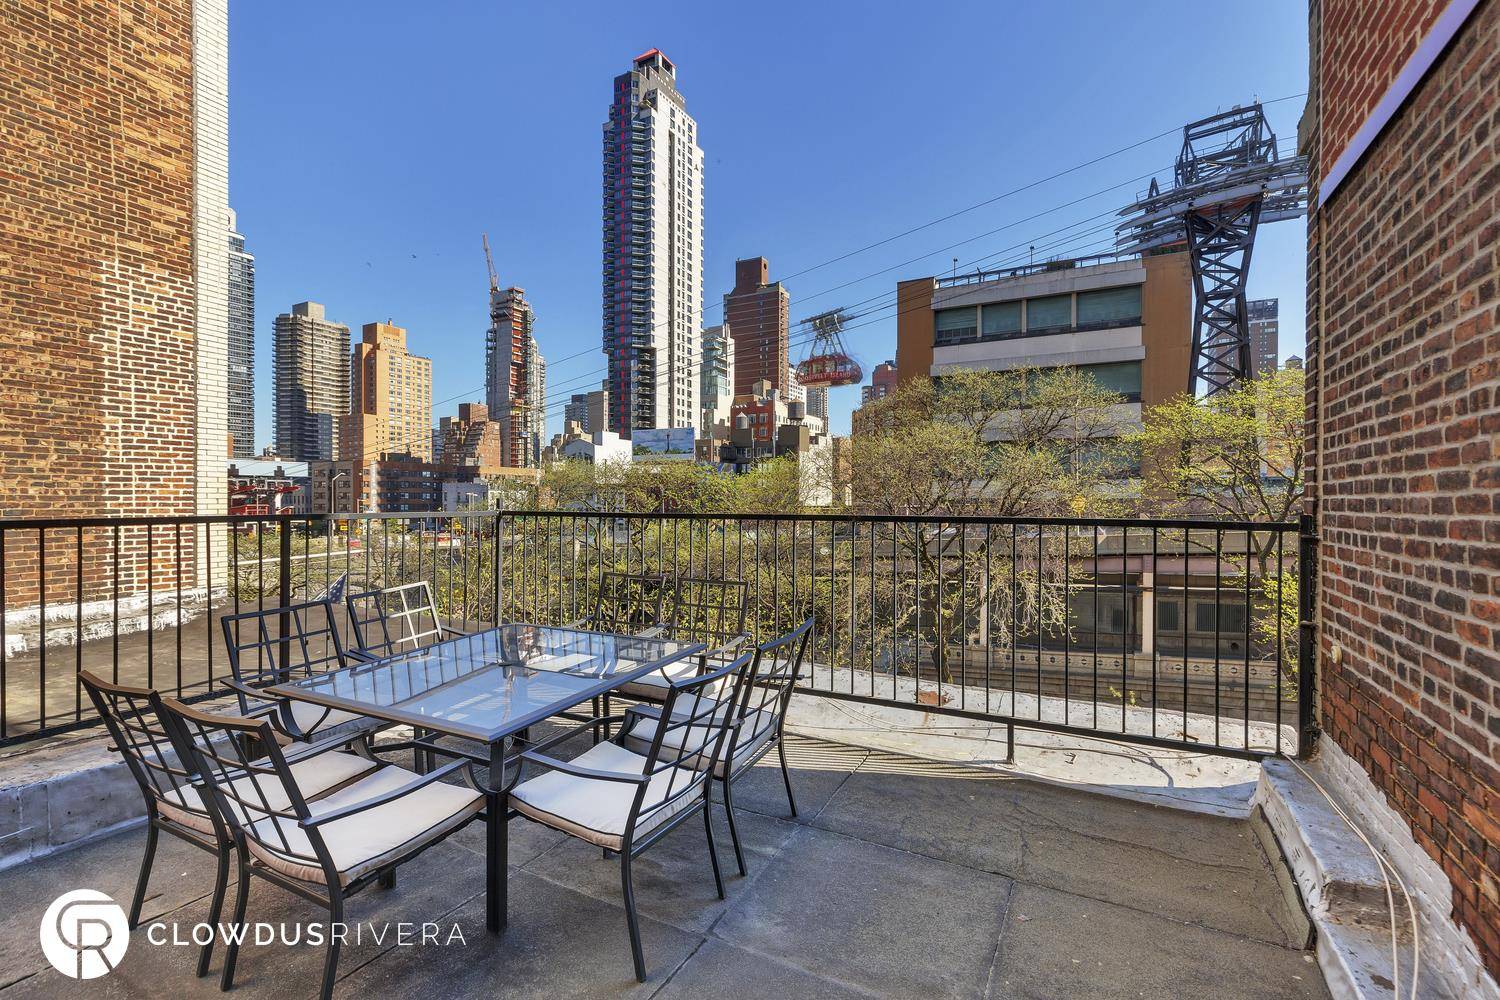 GRAND THREE BEDROOM HOME WITH PRIVATE ROOF DECK336 East 59th Street, Apt PH3YOUR HOMEWelcome home to this stunning duplex three bedroom, two full bath home with nearly 300 square foot ...